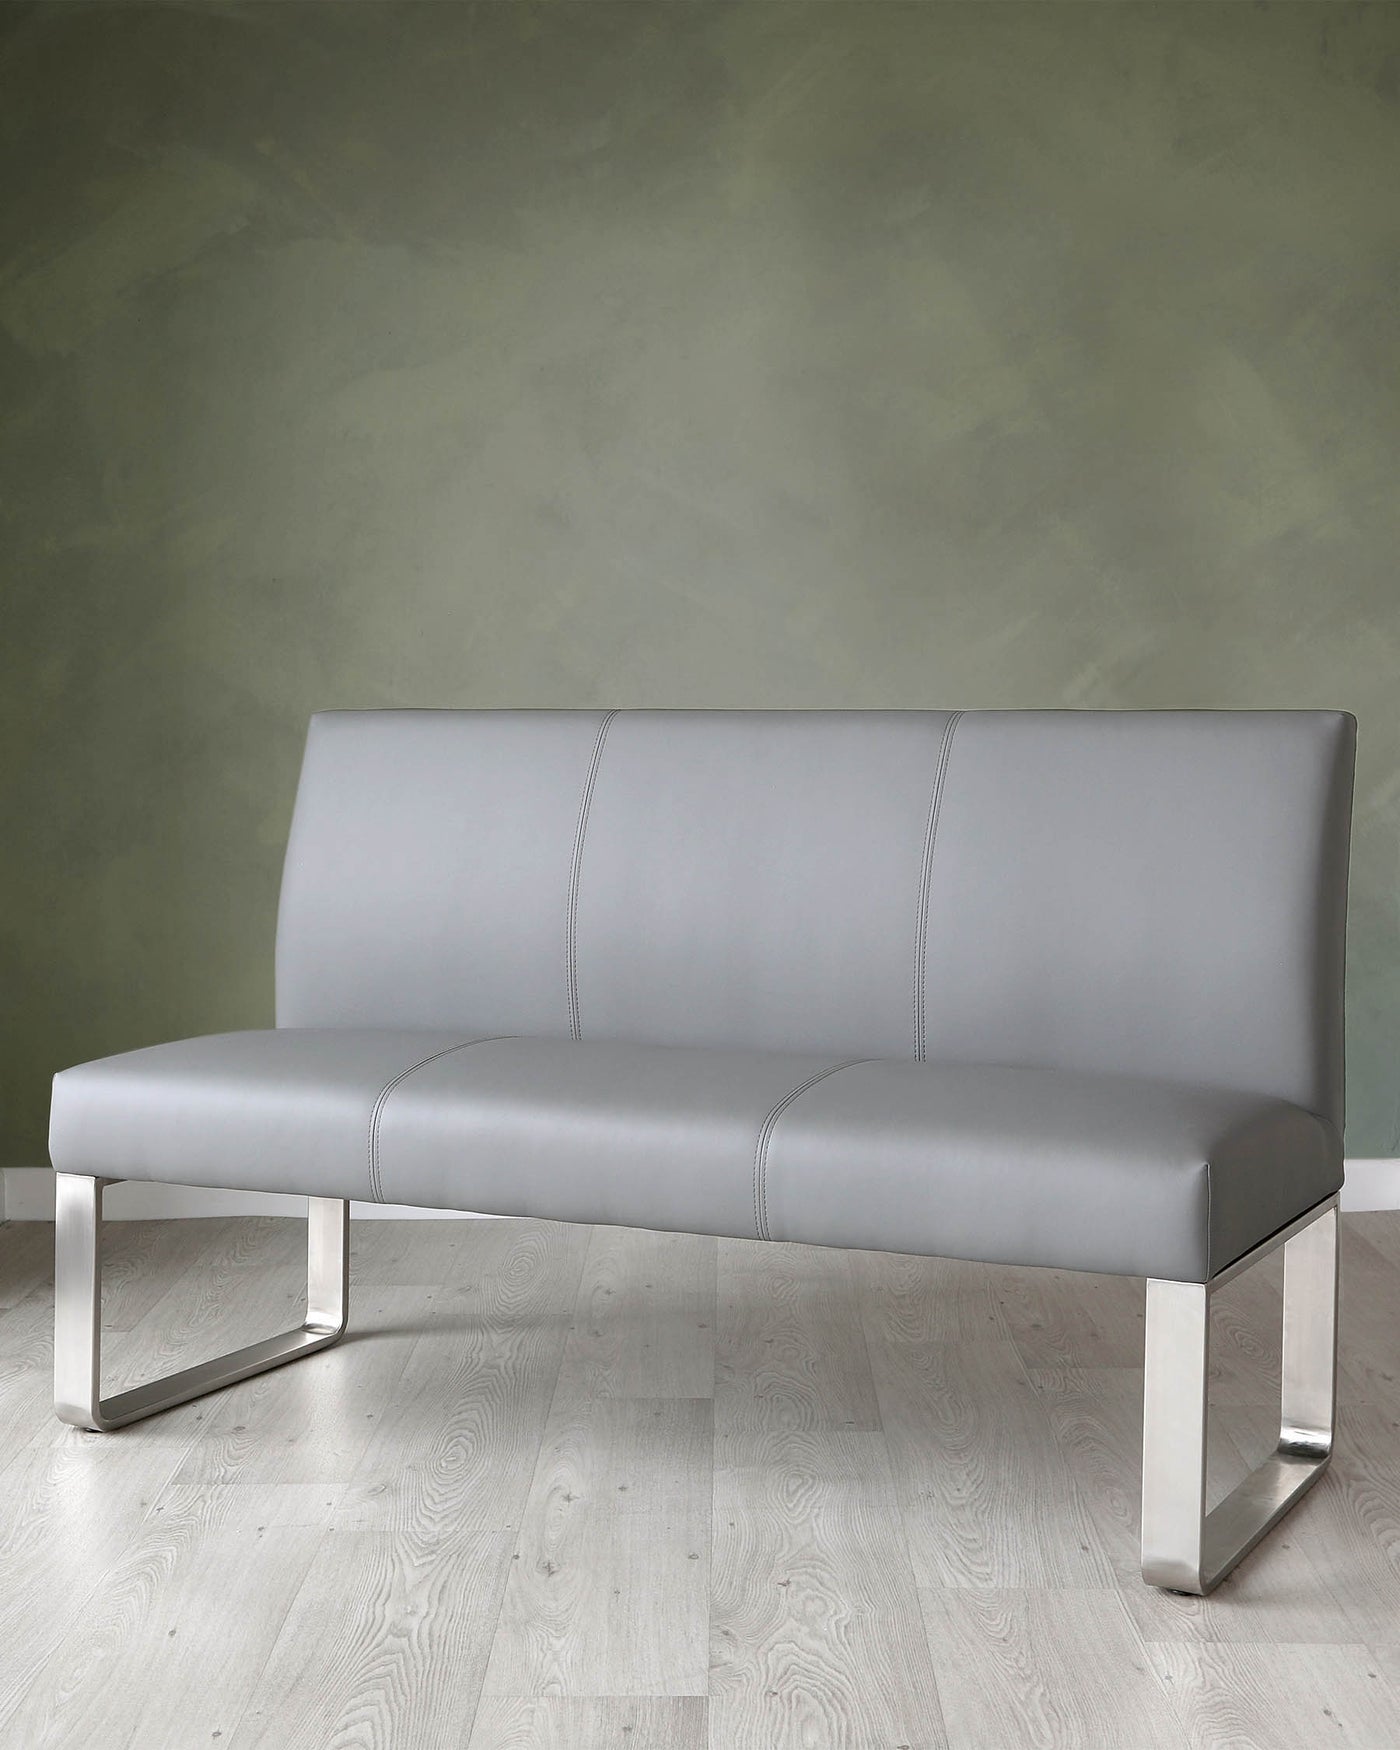 A modern grey leather bench with a minimalist design featuring a straight backrest, seat with subtle stitching detail, and sleek chrome U-shaped legs positioned on a light wood floor against a textured olive green wall.